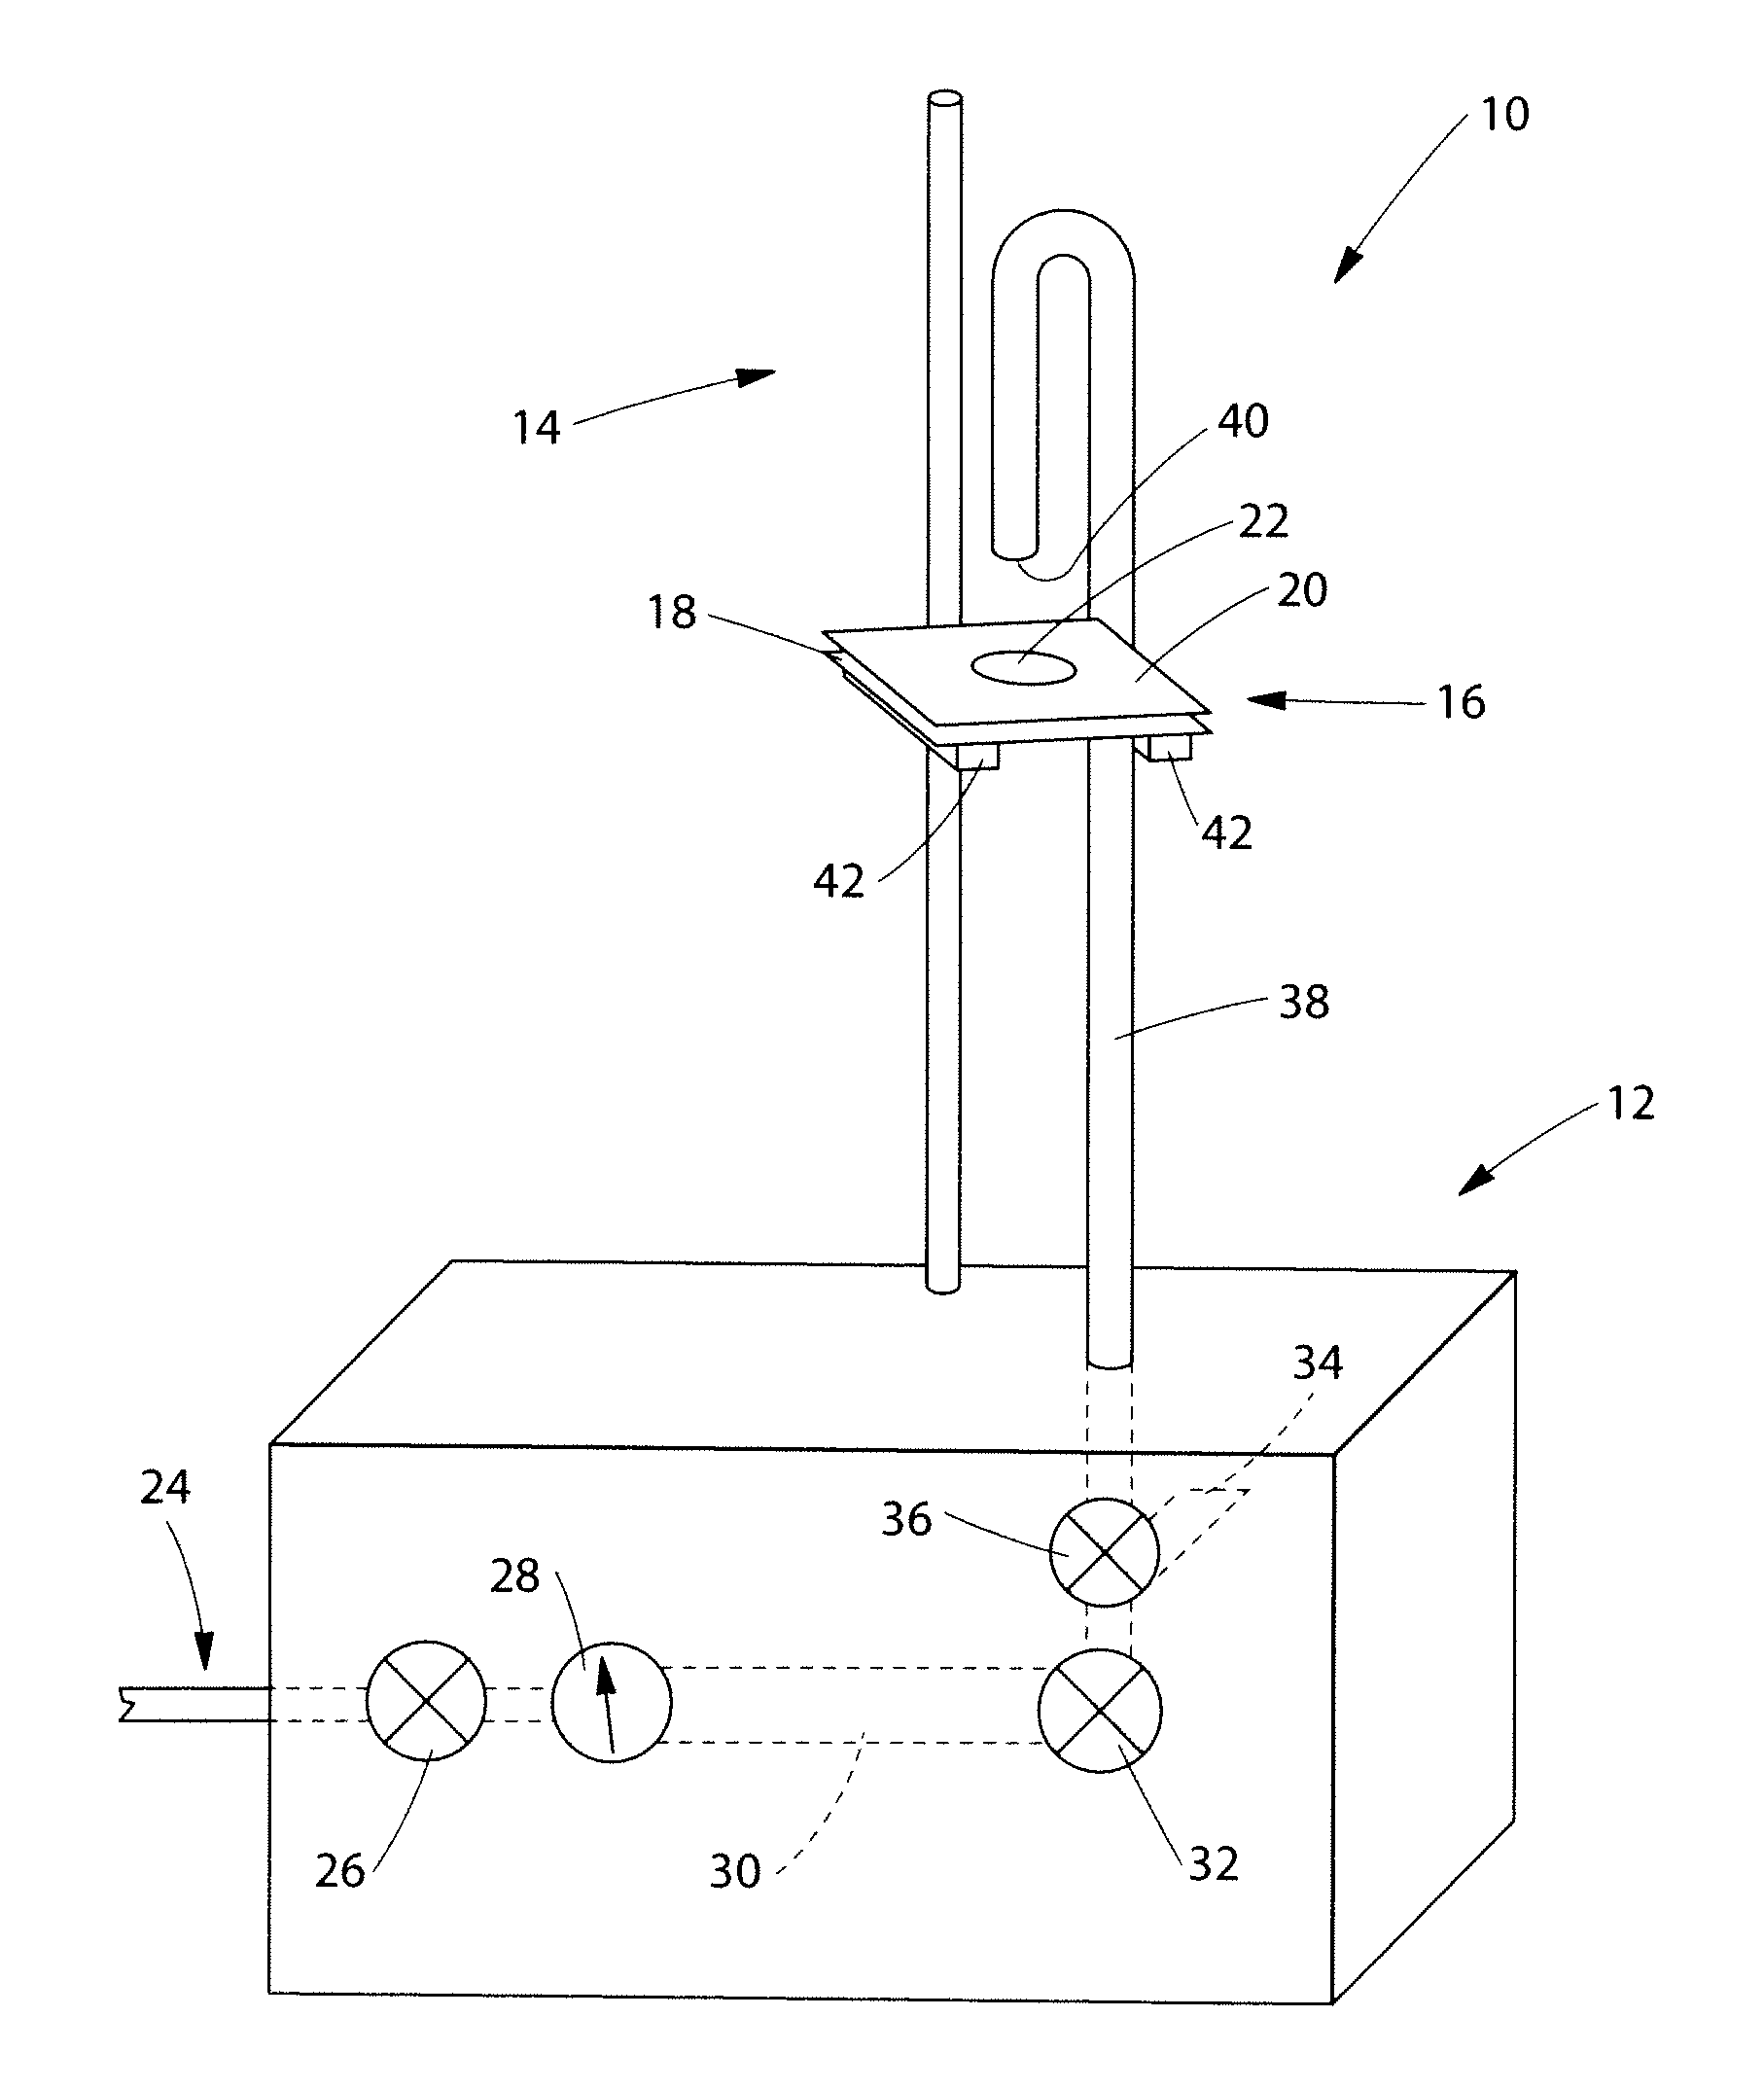 Process for demonstrating tissue product break-through